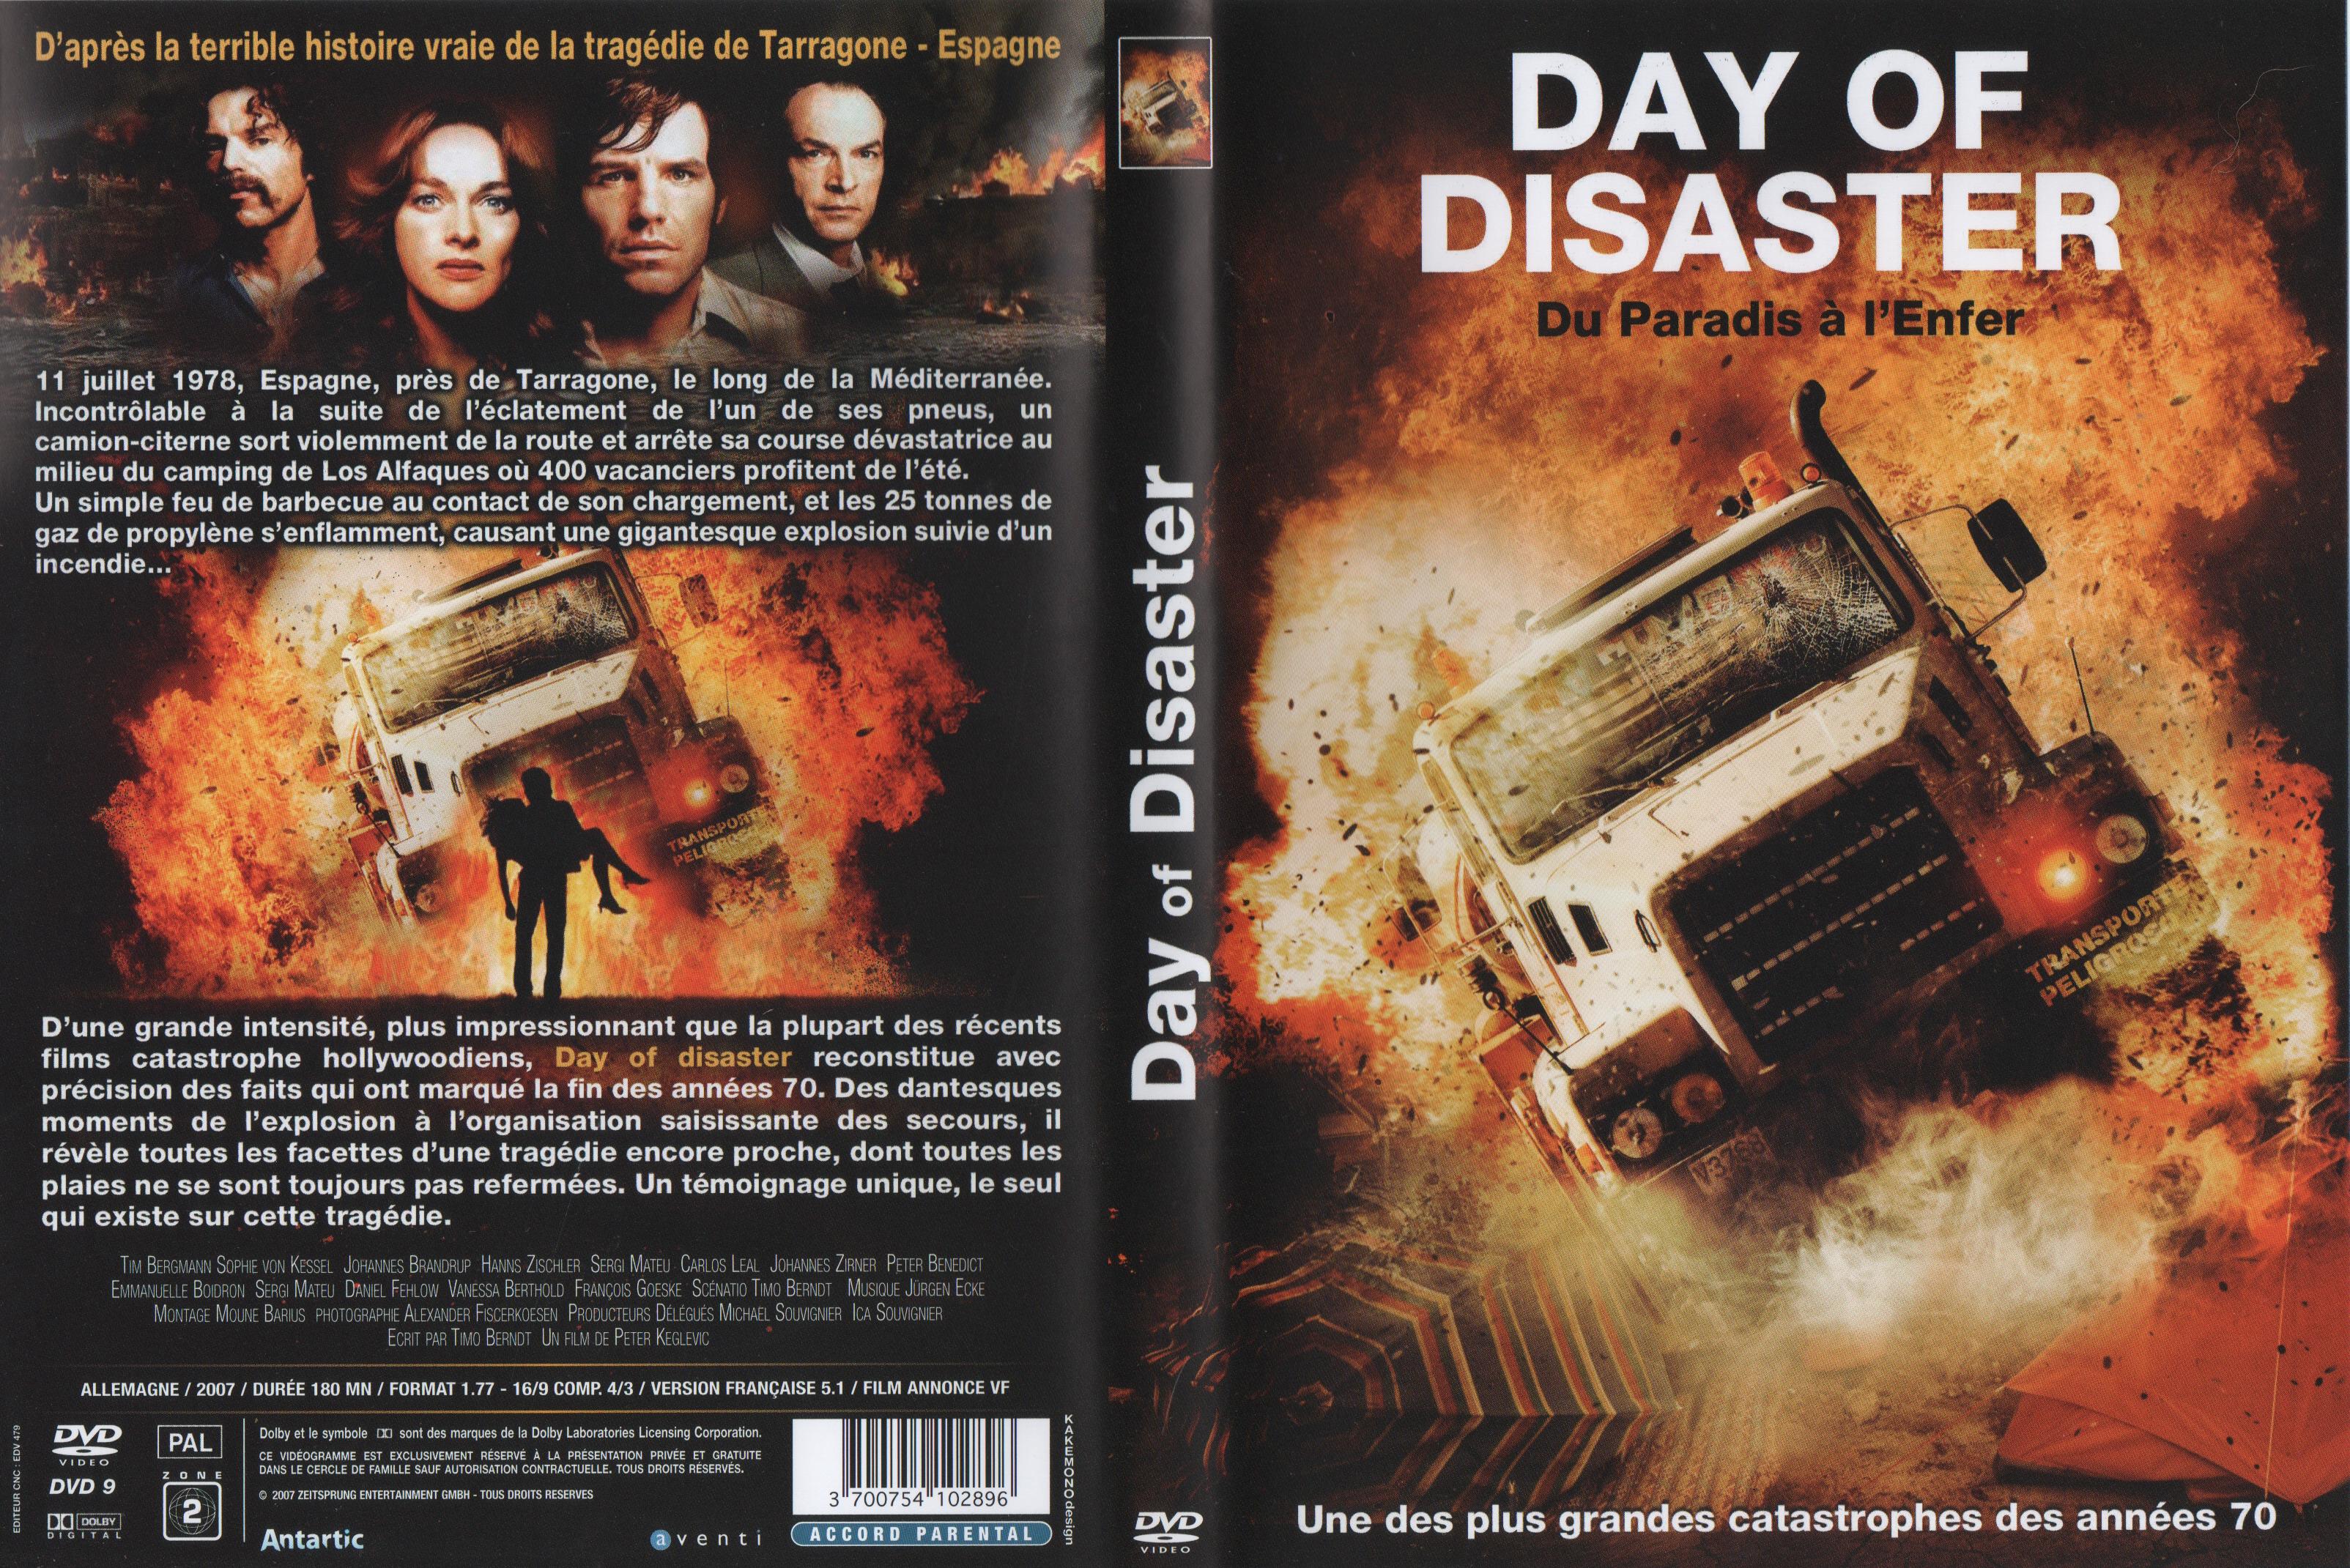 Jaquette DVD Day of dysaster